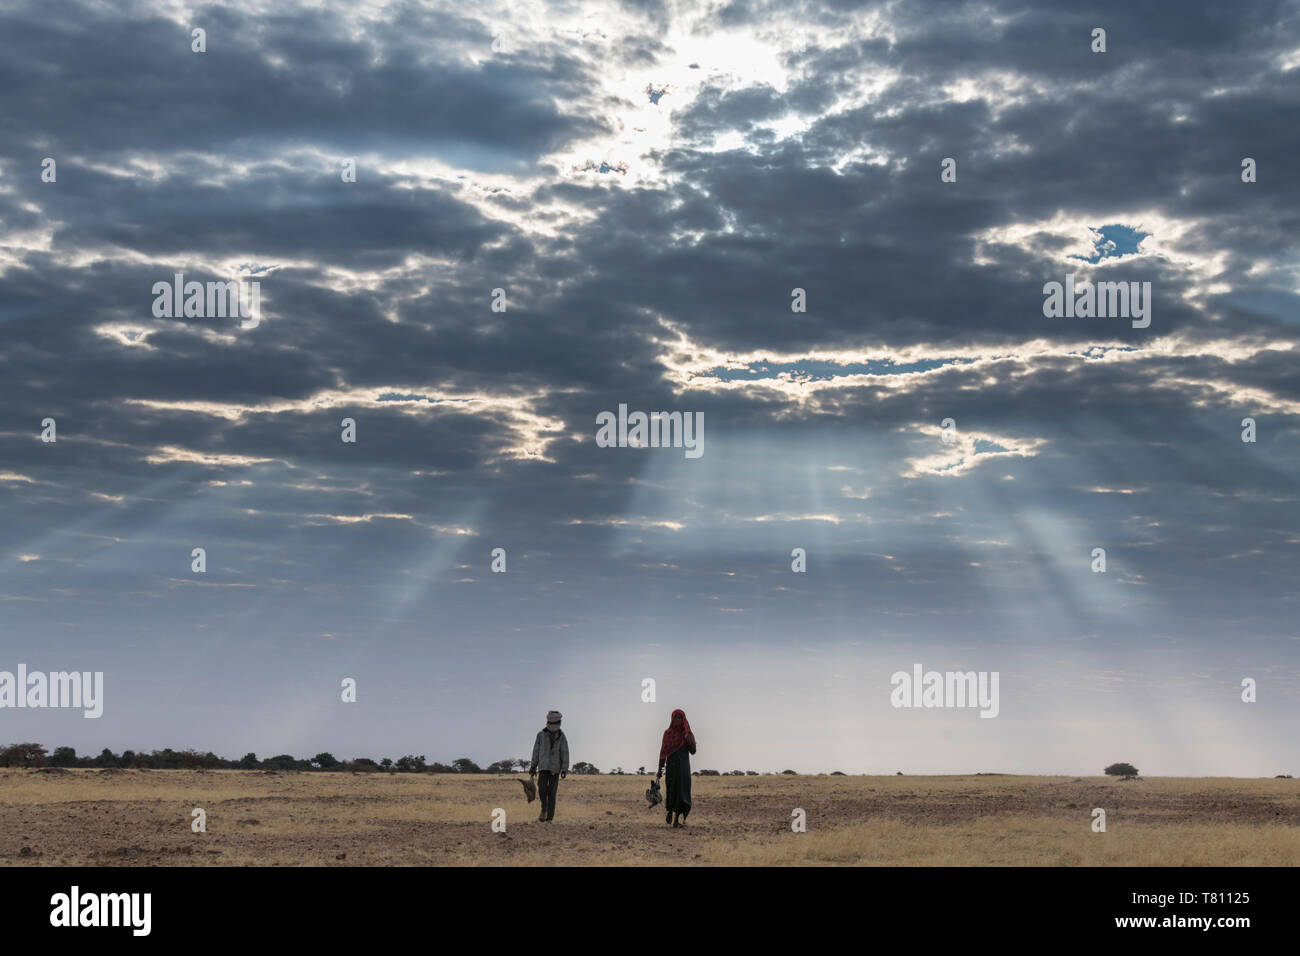 Bedouin children walking under a dramatic sky in the Sahel, Chad, Africa Stock Photo